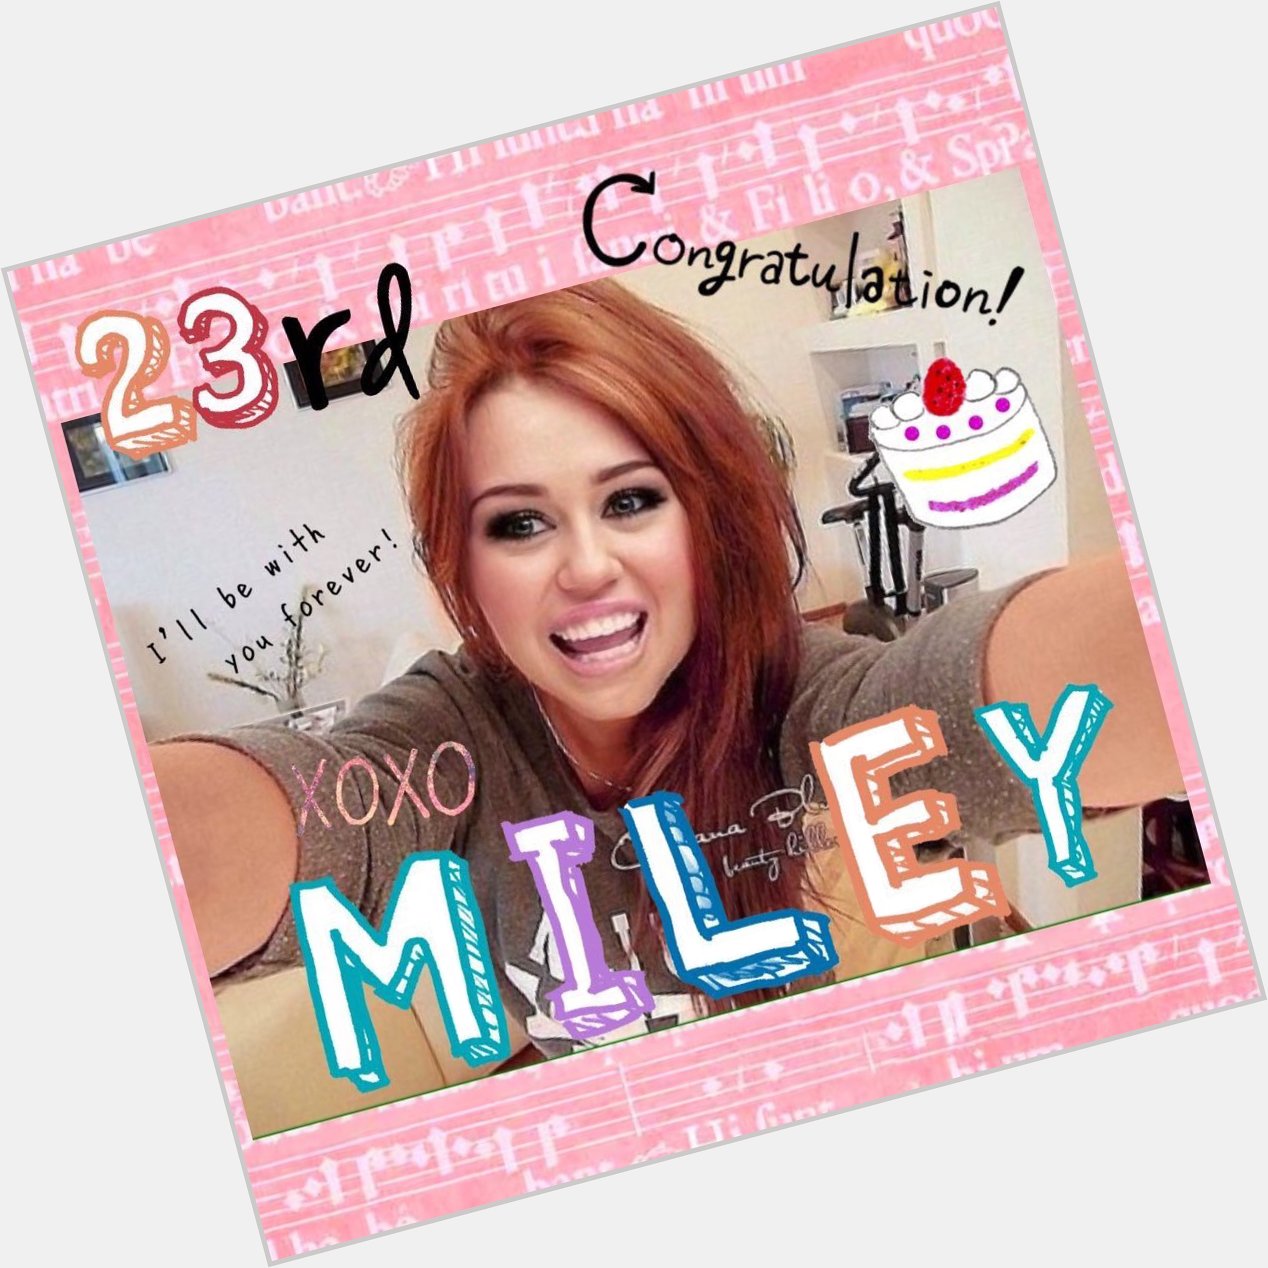    Happy 23th birthday!!
I\ll continue to love u now and forever   Miley Cyrus 